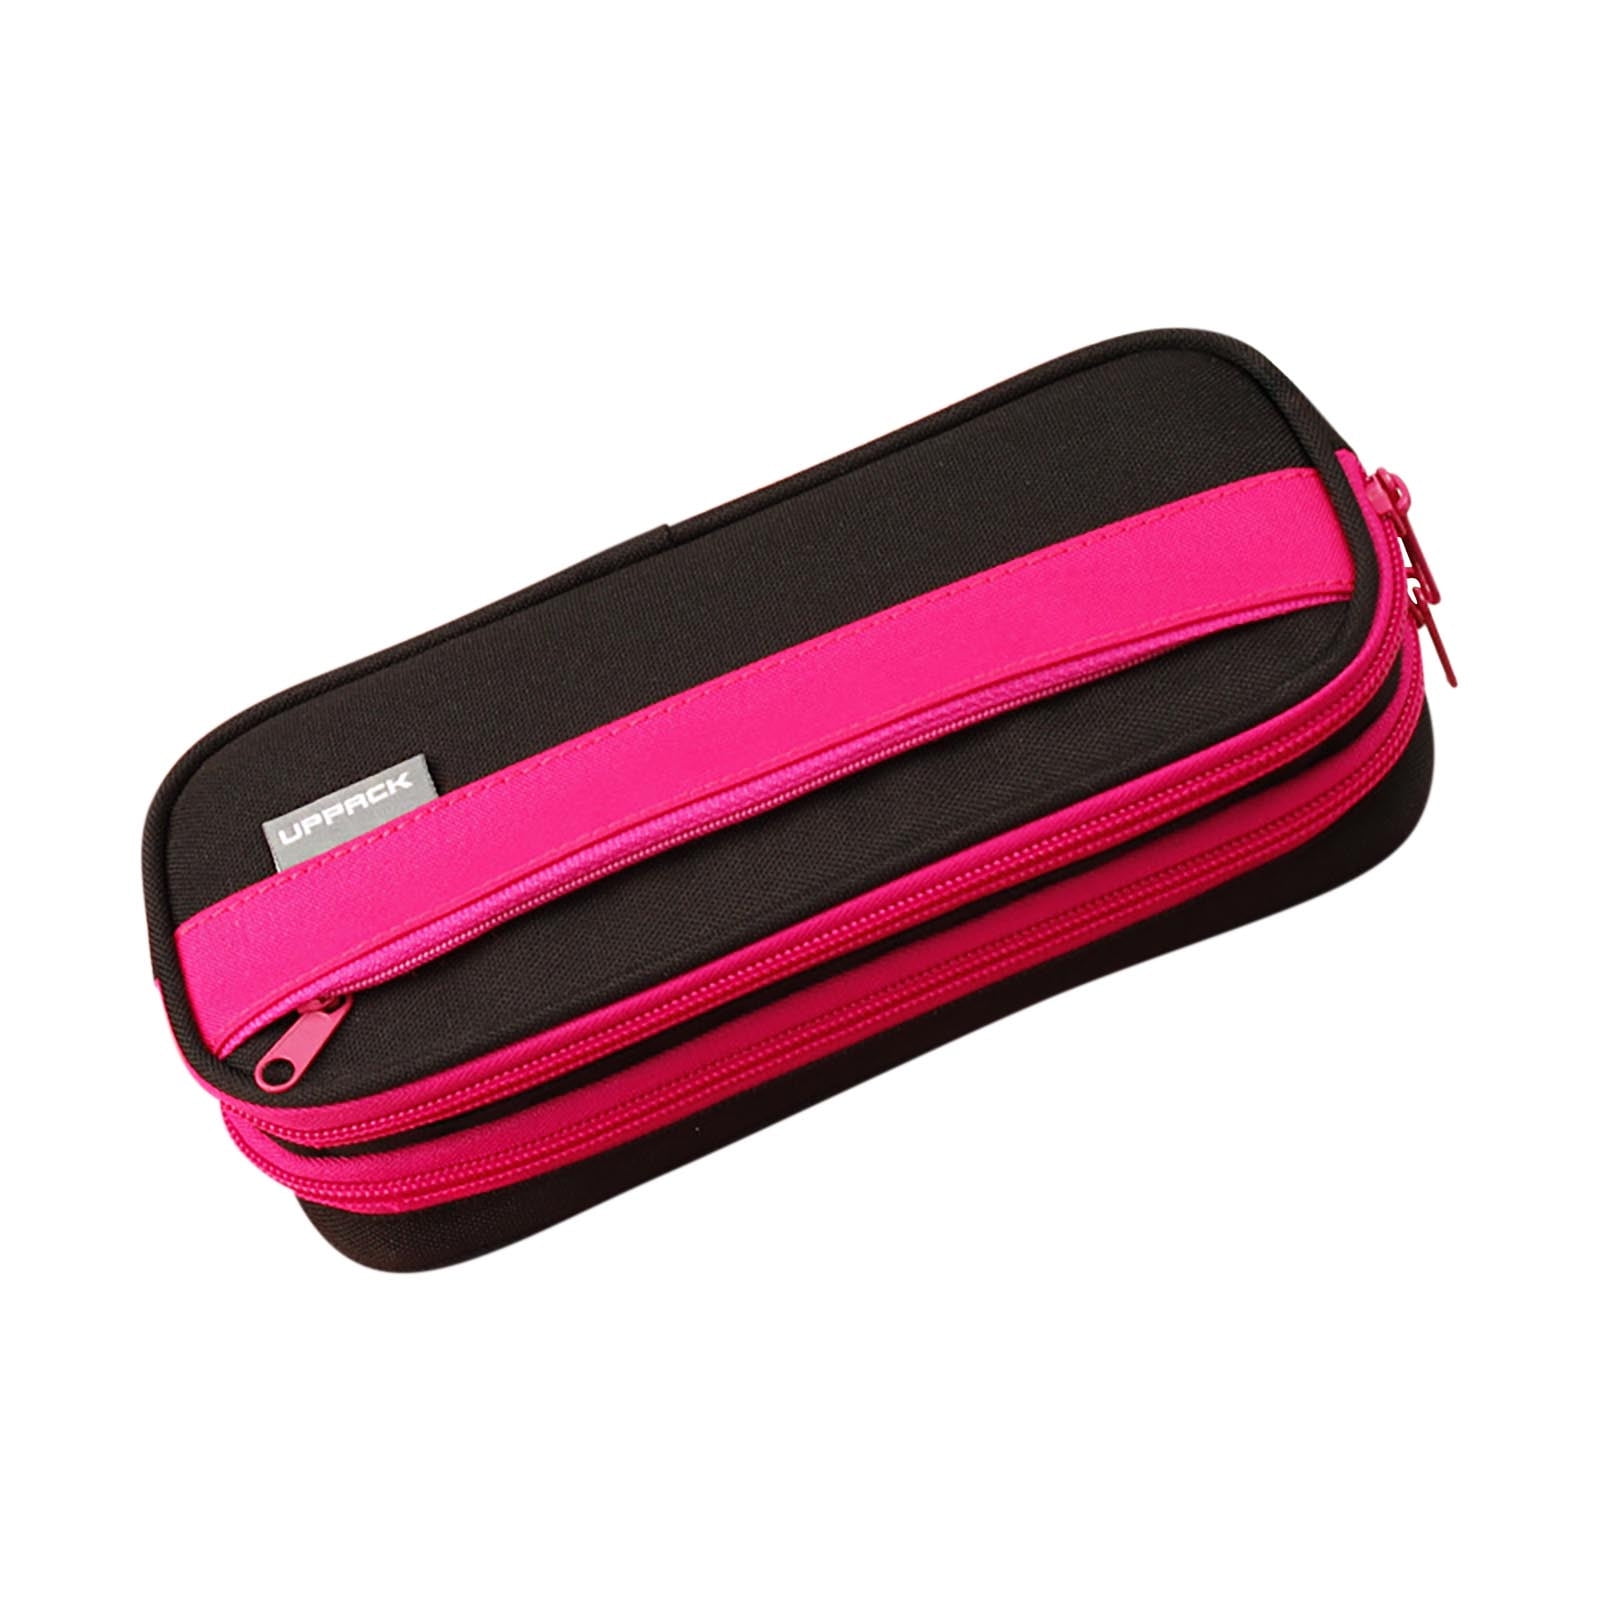 Pompotops Pencil Case Pen Bag Holder Pouch, Multifunctional Small